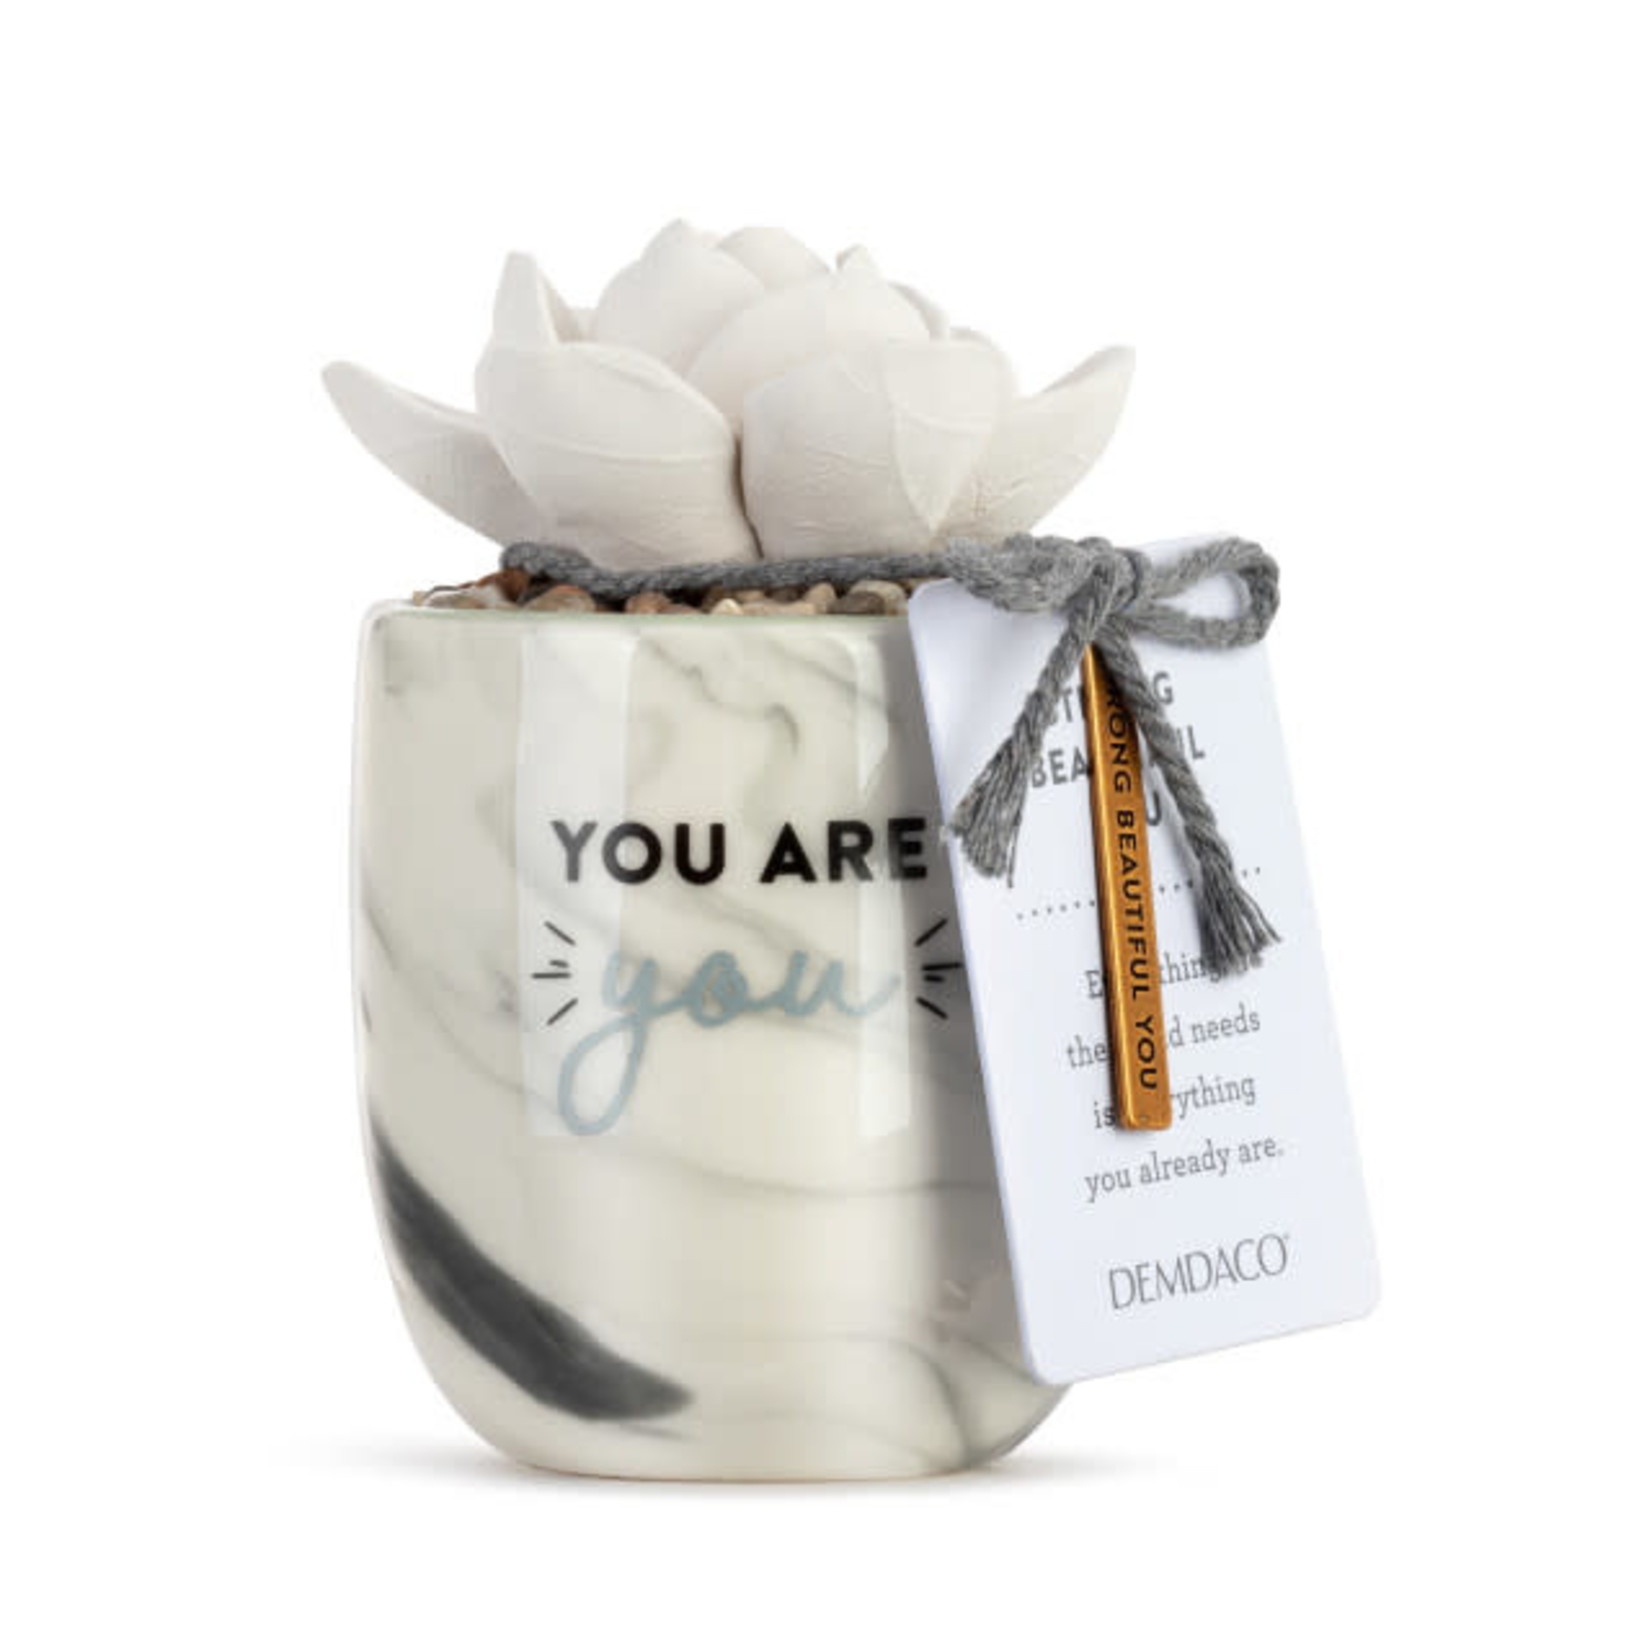 Demdaco Succulent Oil Diffuser - You are You